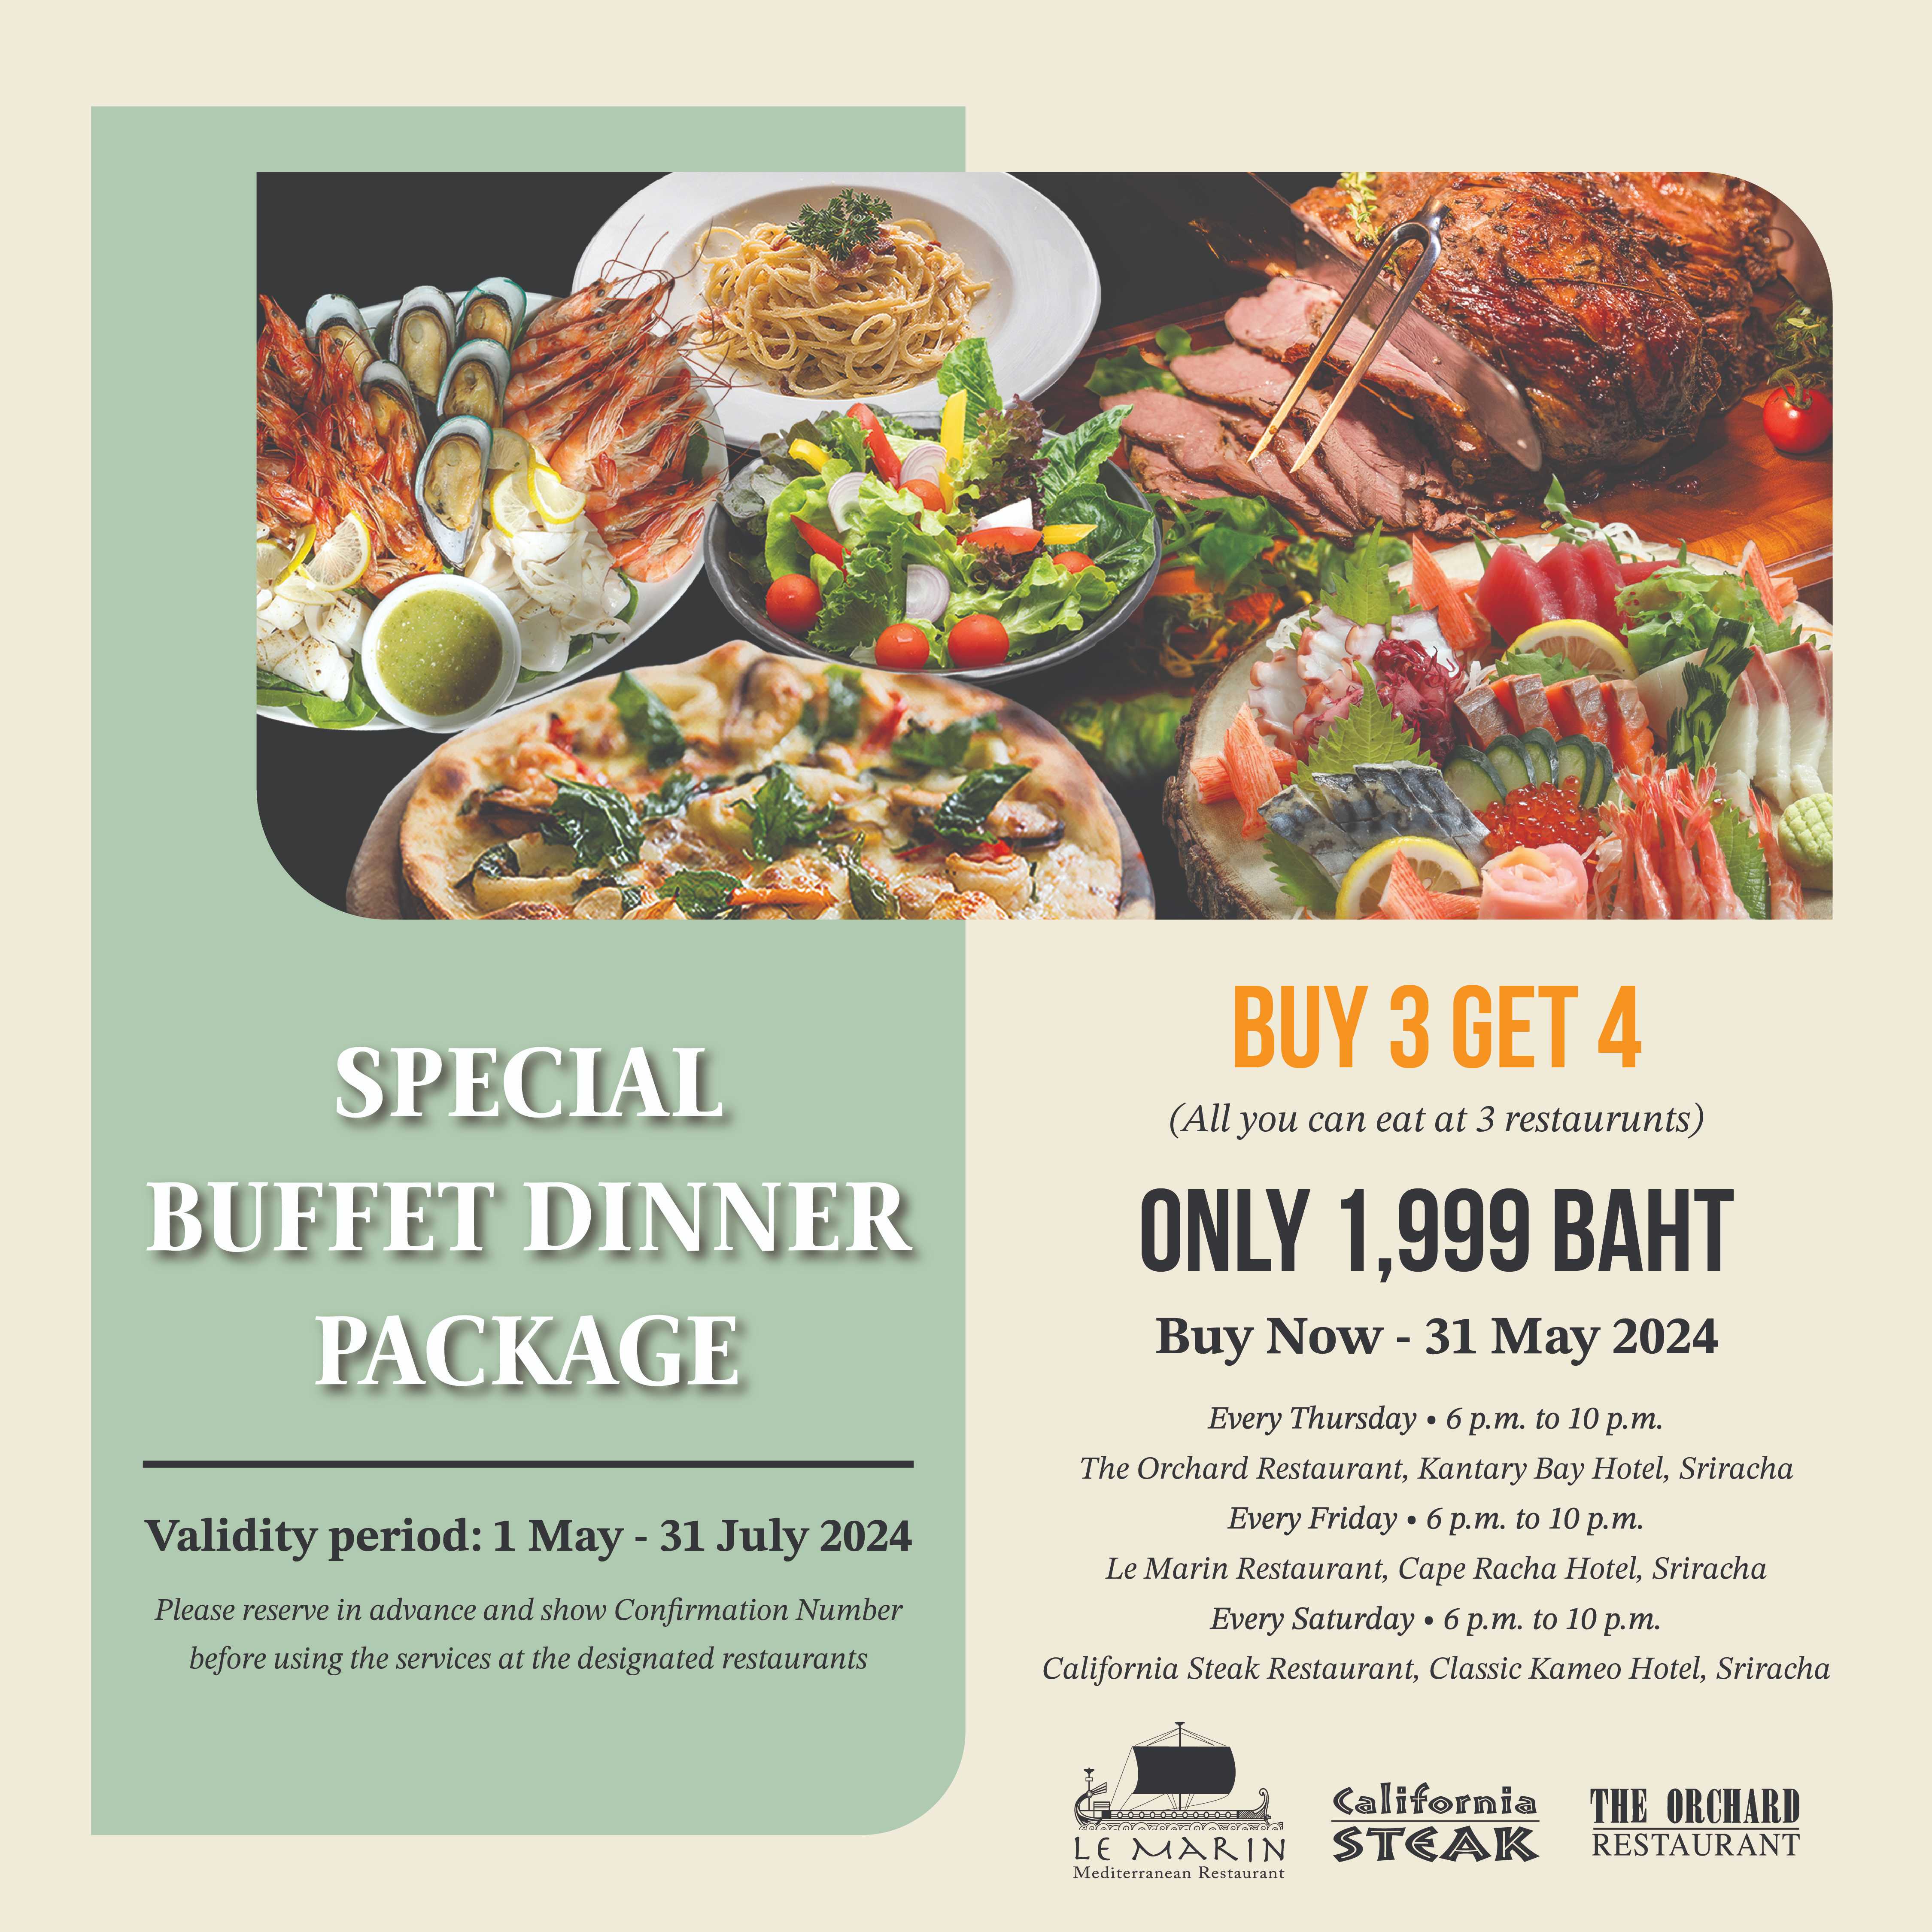 Special Buffet Dinner Package